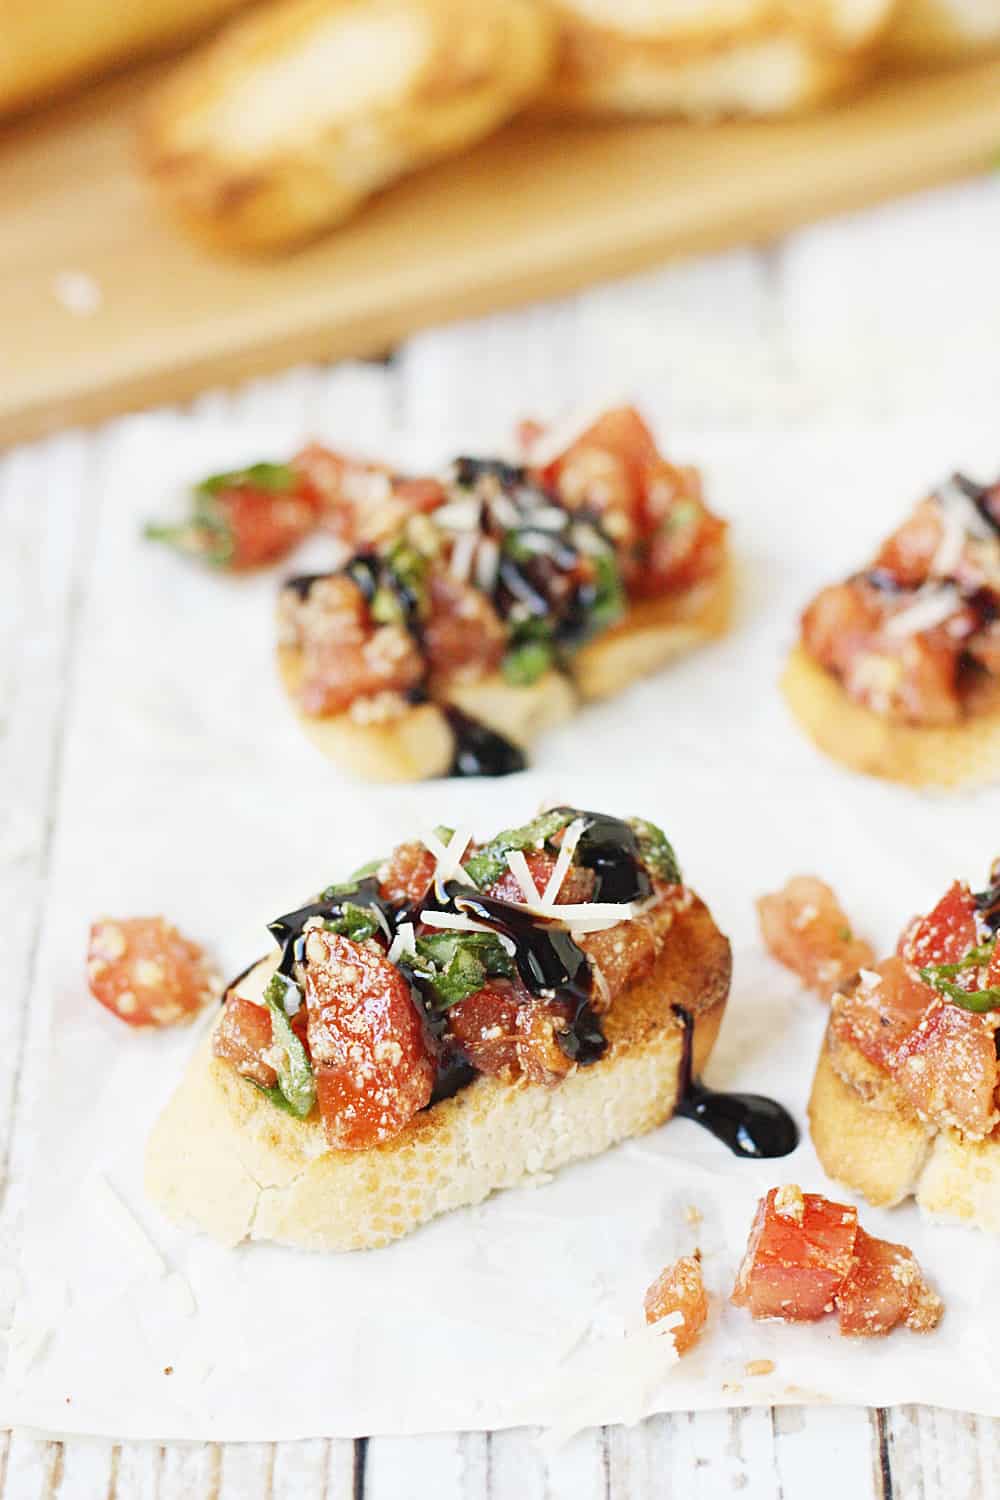 Easy Tomato Bruschetta Recipe - Top toasted baguette slices with this easy tomato bruschetta for an appetizer full of tomato, basil, balsamic flavor that is perfect for holiday parties! #bruschetta #tomato #halfscratched #appetizer #tomatobruschetta #cooking #baking #easyrecipe #holidayrecipe